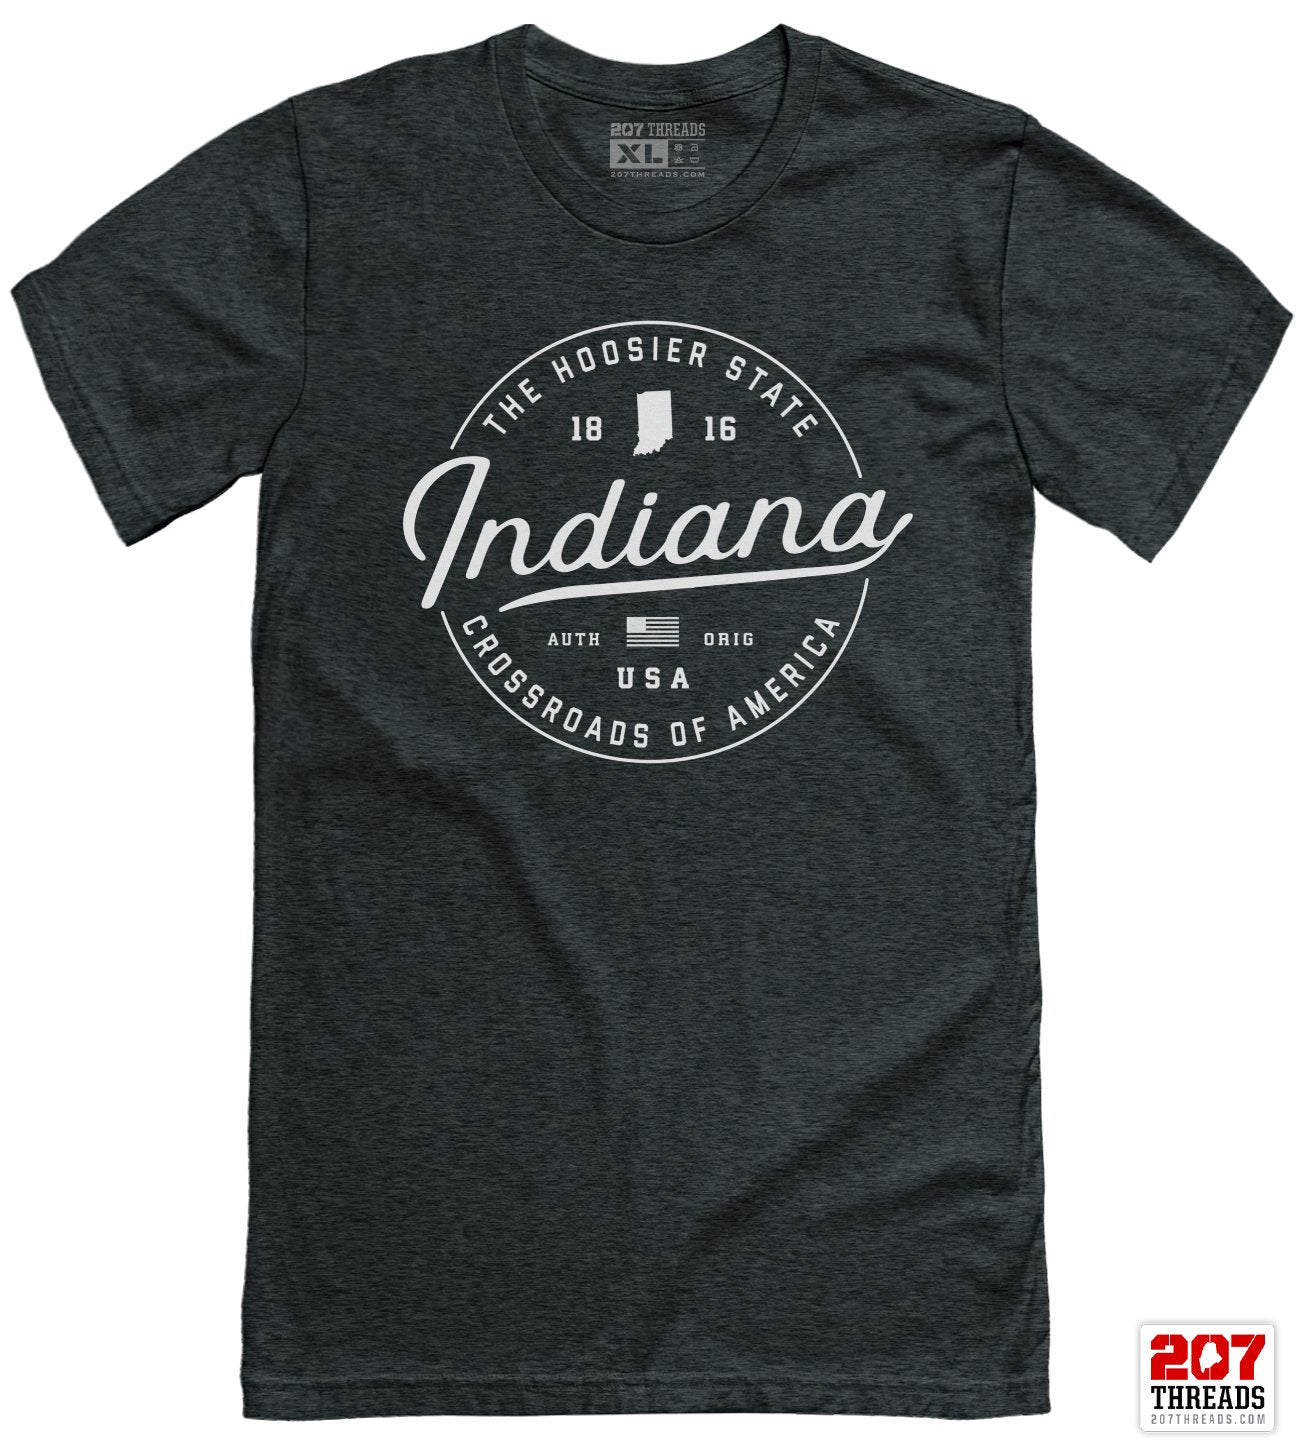 State of Indiana T-Shirt - Soft Indiana Tee